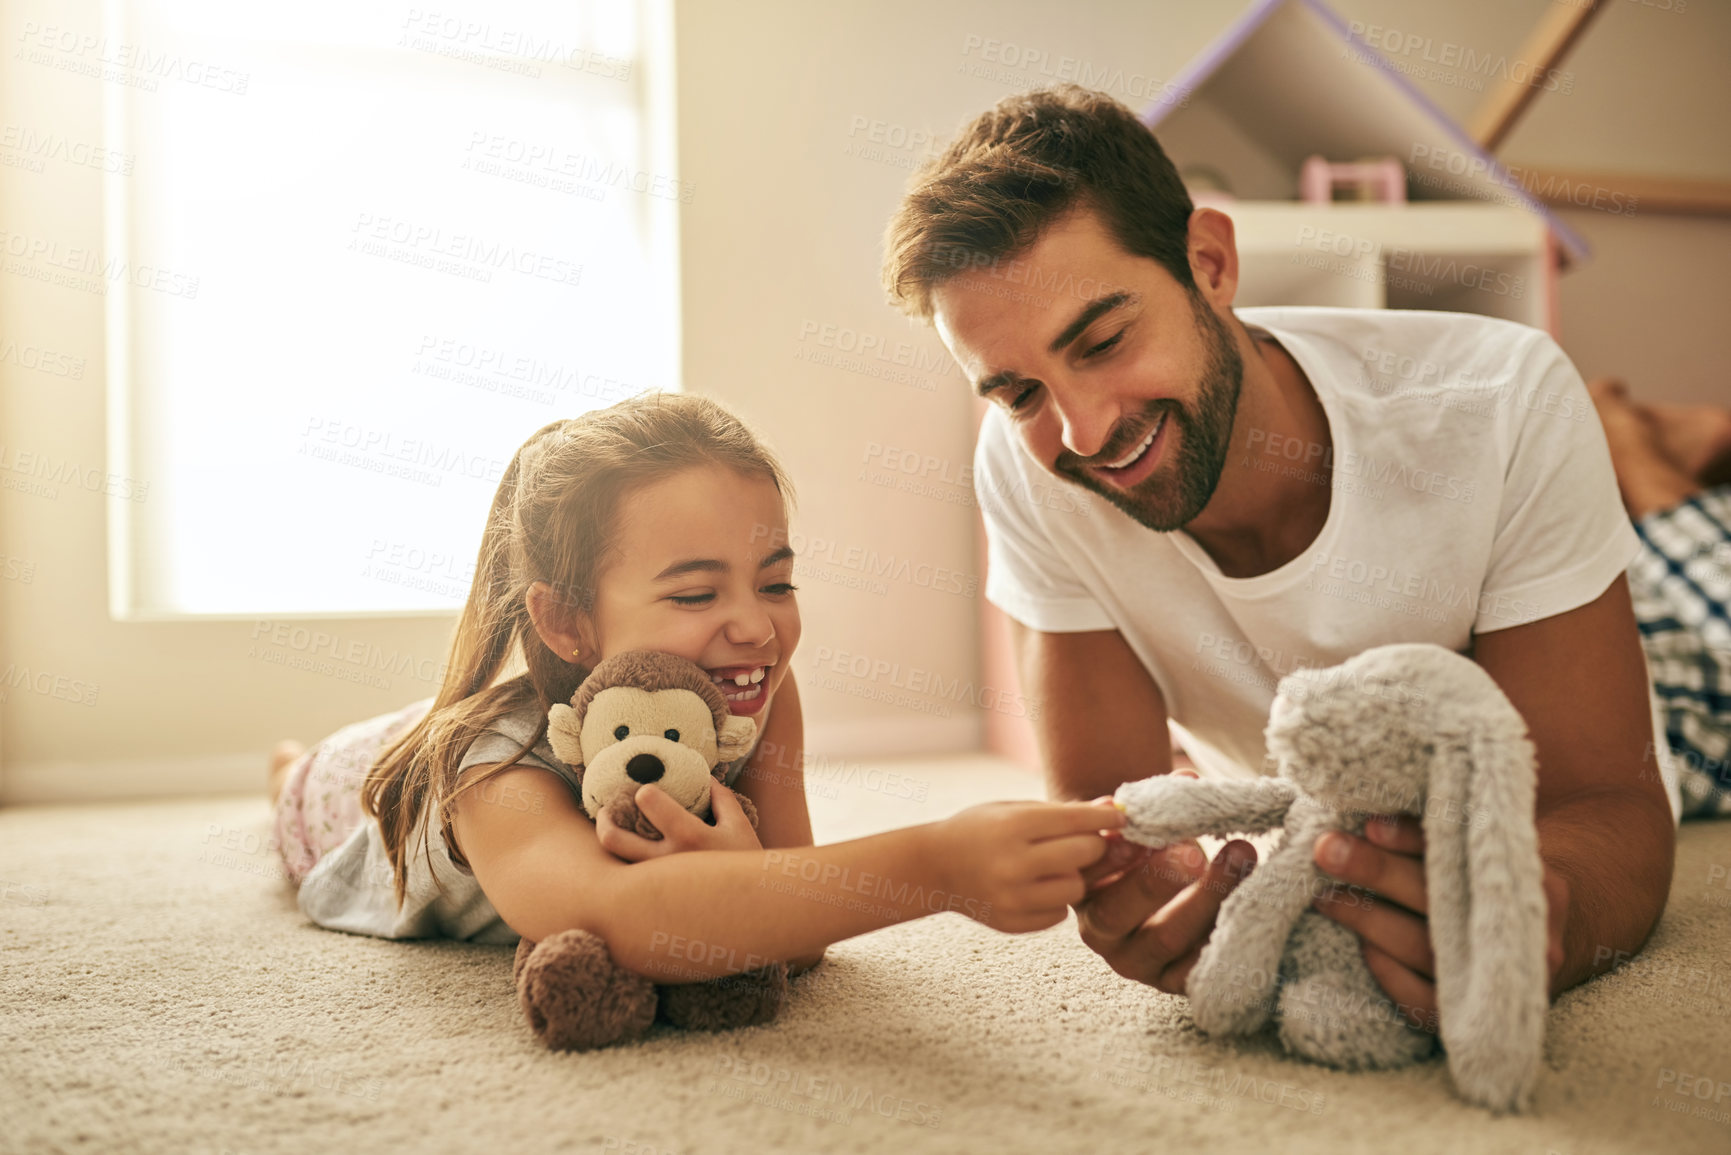 Buy stock photo Shot of a handsome young man and his daughter playing with stuffed toys on her bedroom floor